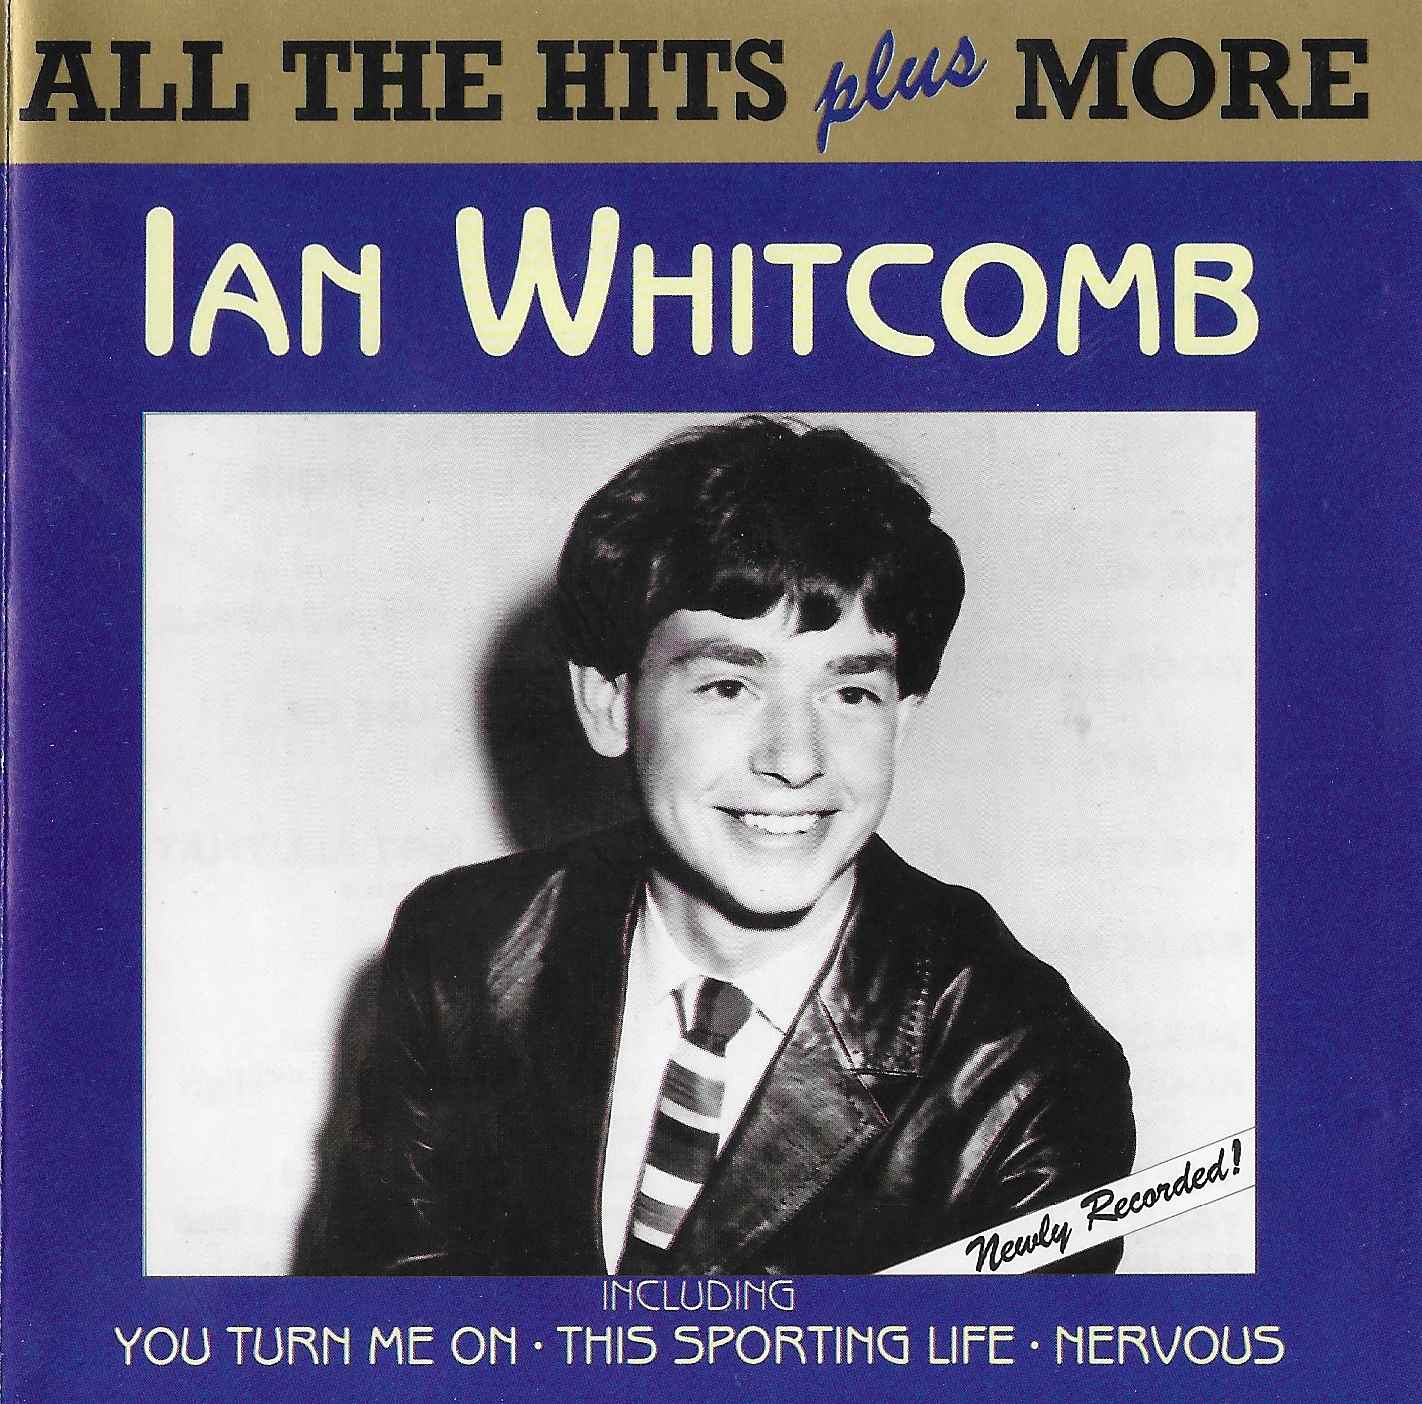 Picture of All the hits plus more by artist Ian Whitcomb from the BBC cds - Records and Tapes library